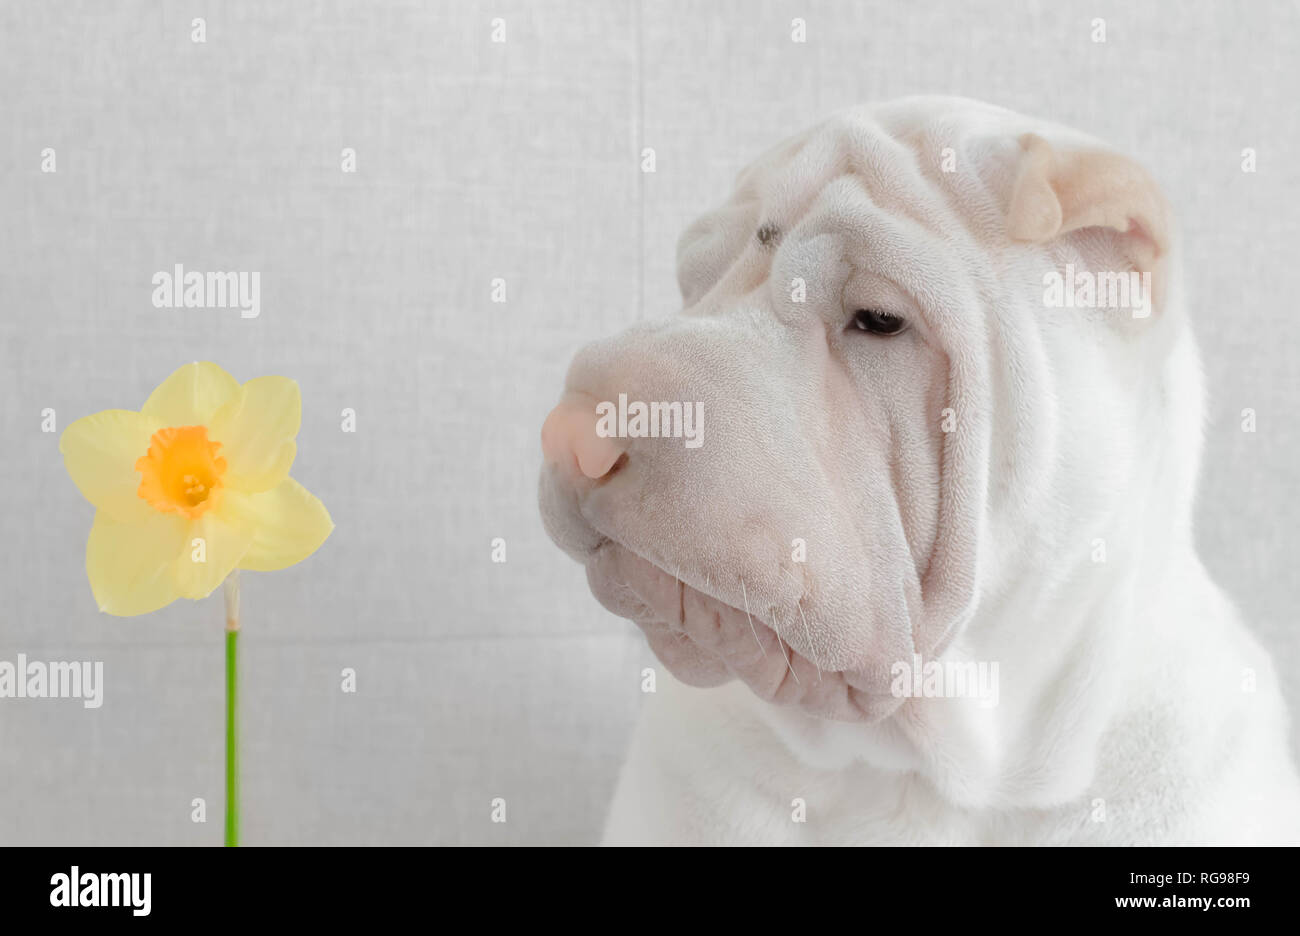 Shar pei puppy dog looking at a daffodil Stock Photo